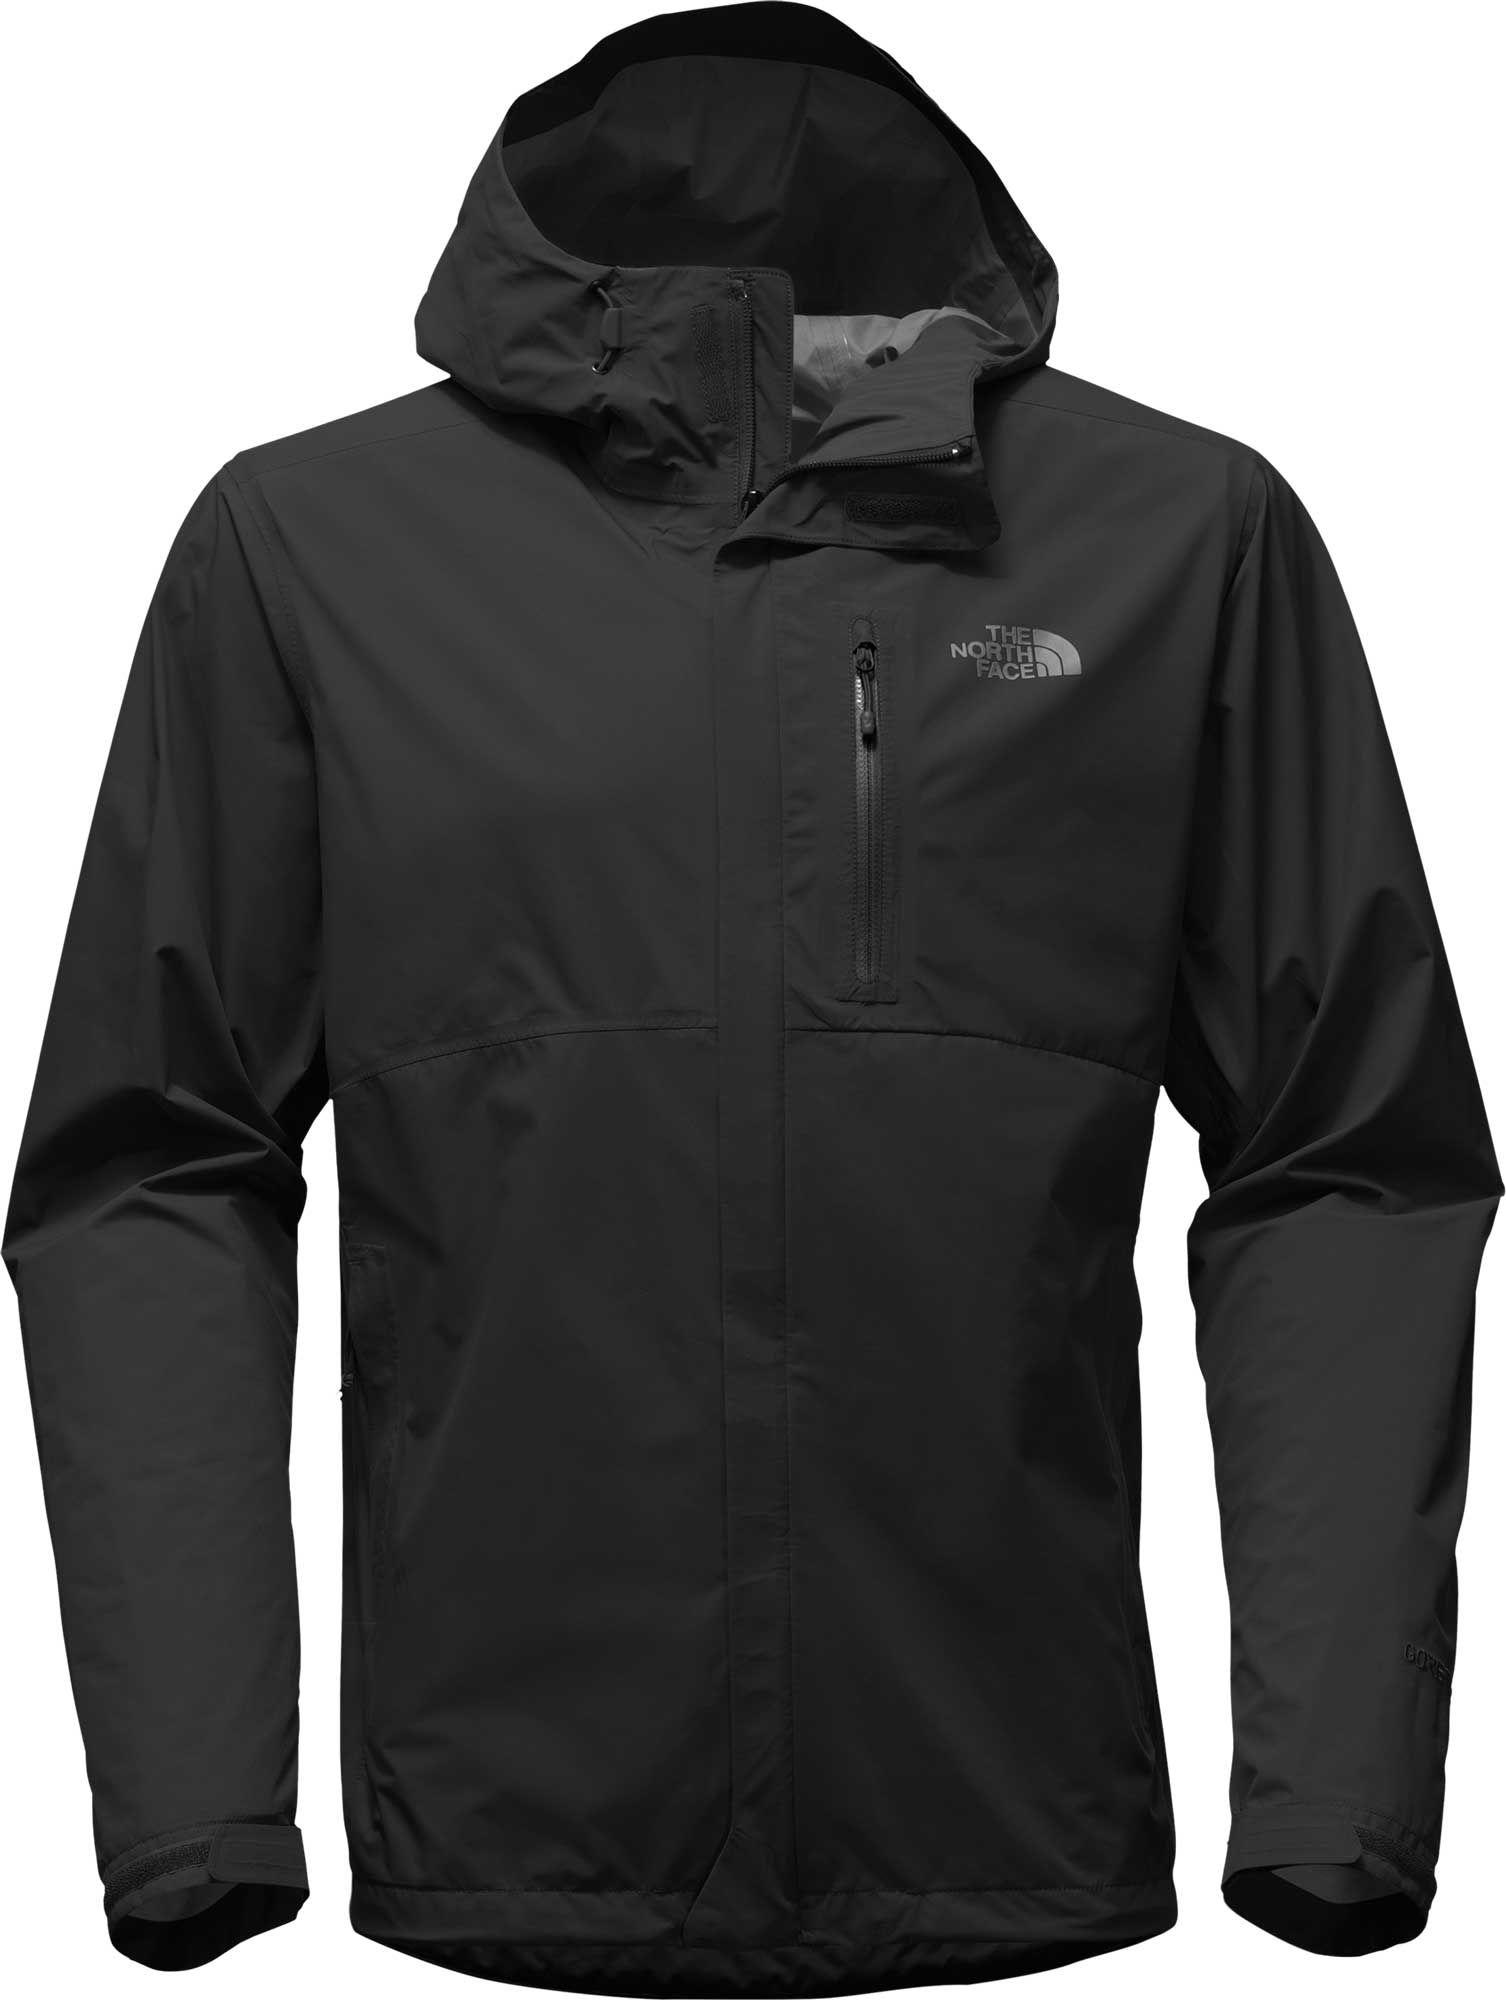 The North Face Synthetic Dryzzle Jacket 